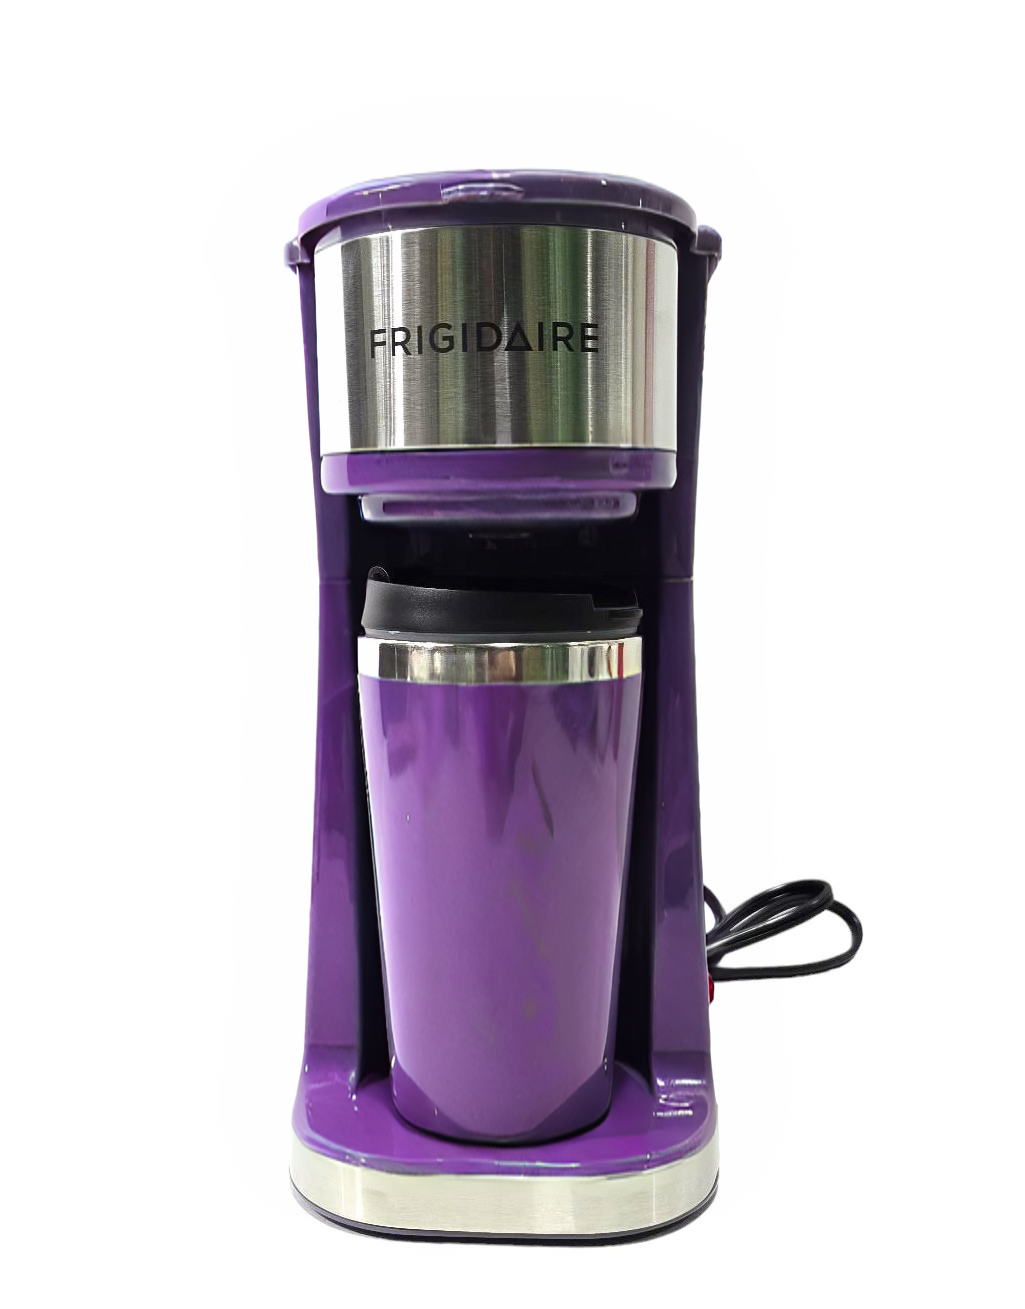 Frigidaire Stainless Steel Coffee Maker - Single Cup With Insulted Travel Mug ECMK095 with 420ml Capacity Purple